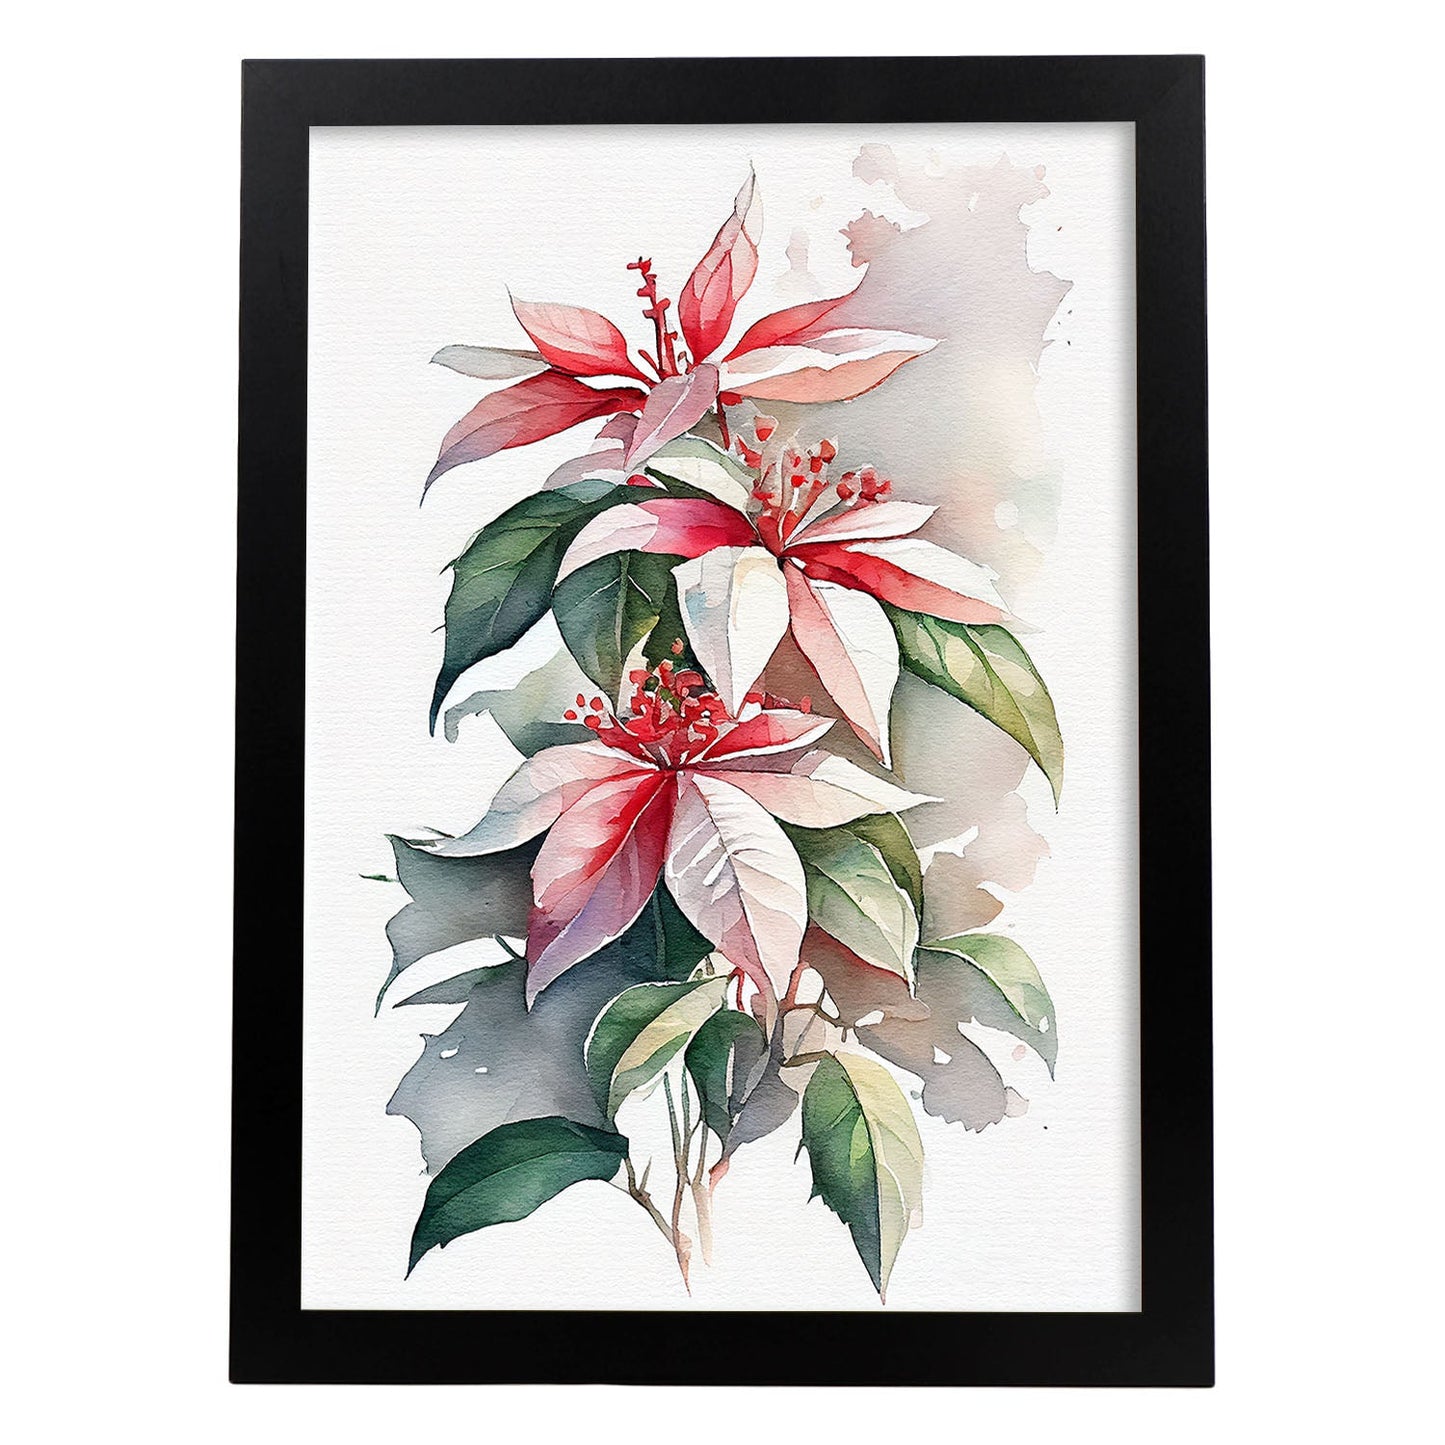 Nacnic watercolor minmal Poinsettia_2. Aesthetic Wall Art Prints for Bedroom or Living Room Design.